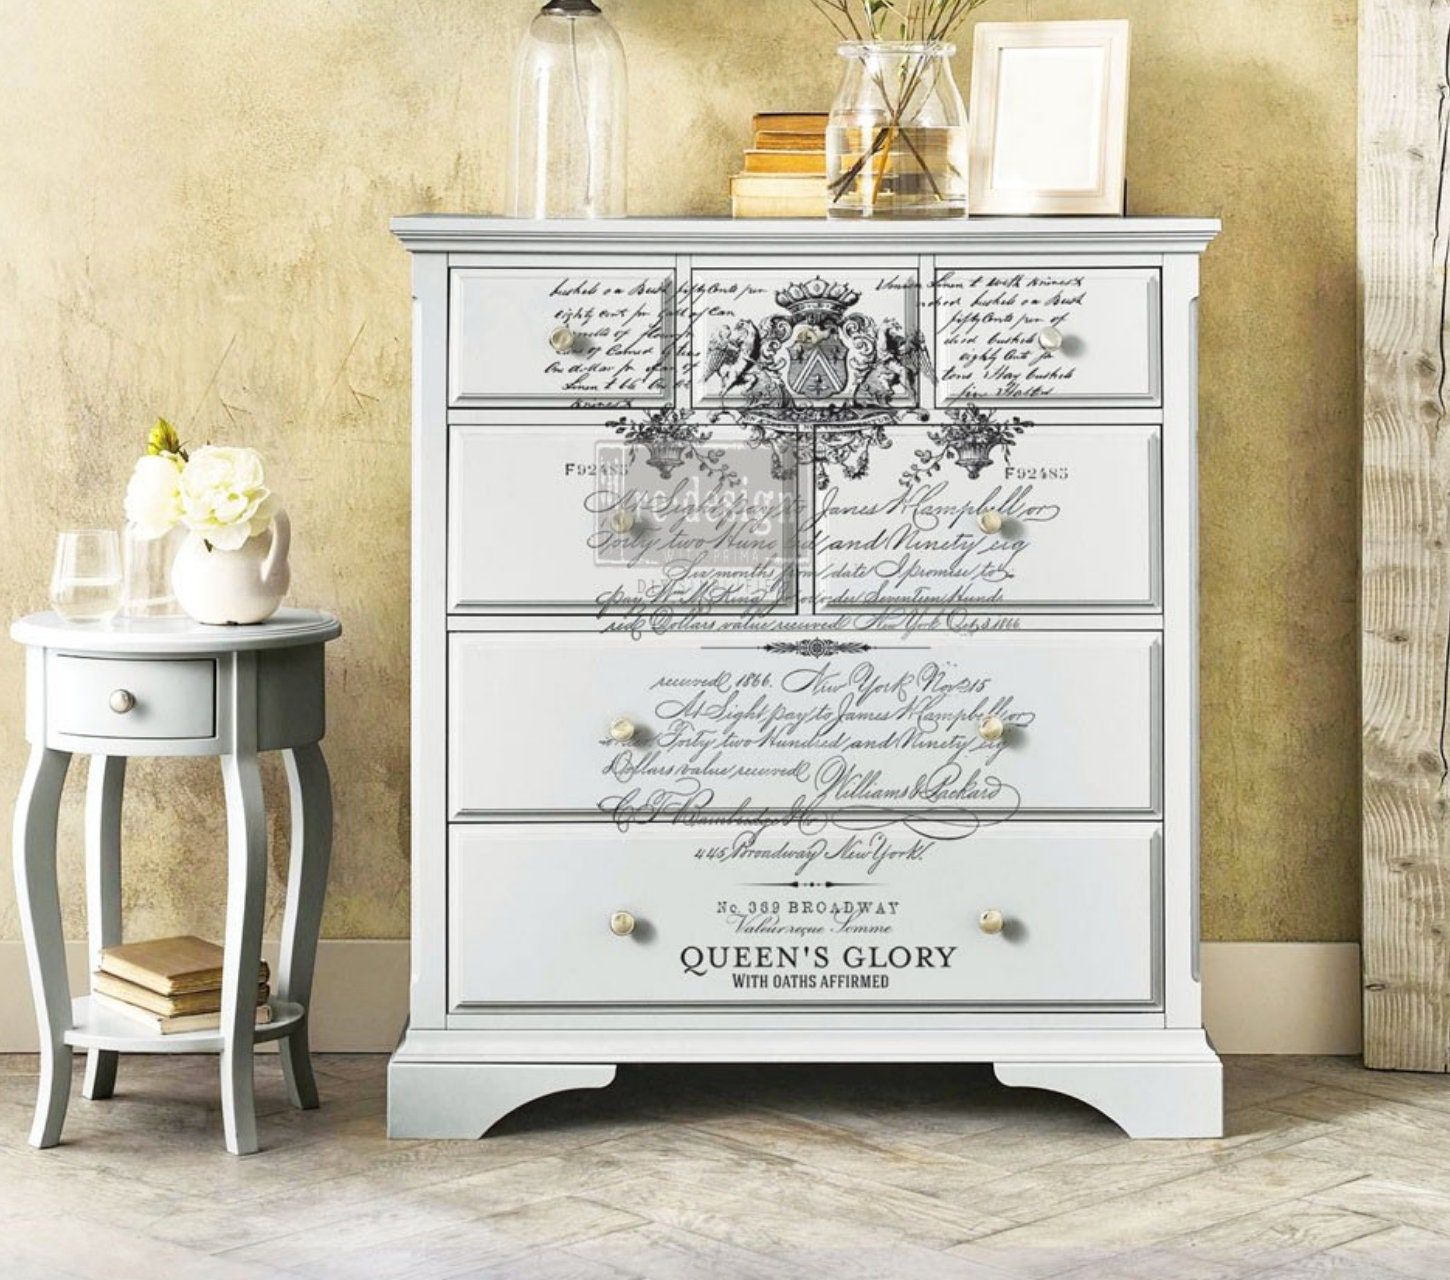 ReDesign With Prima Transfers Furniture Decals NEW FRENCH CERAMICS  Rub On Transfers For Furniture